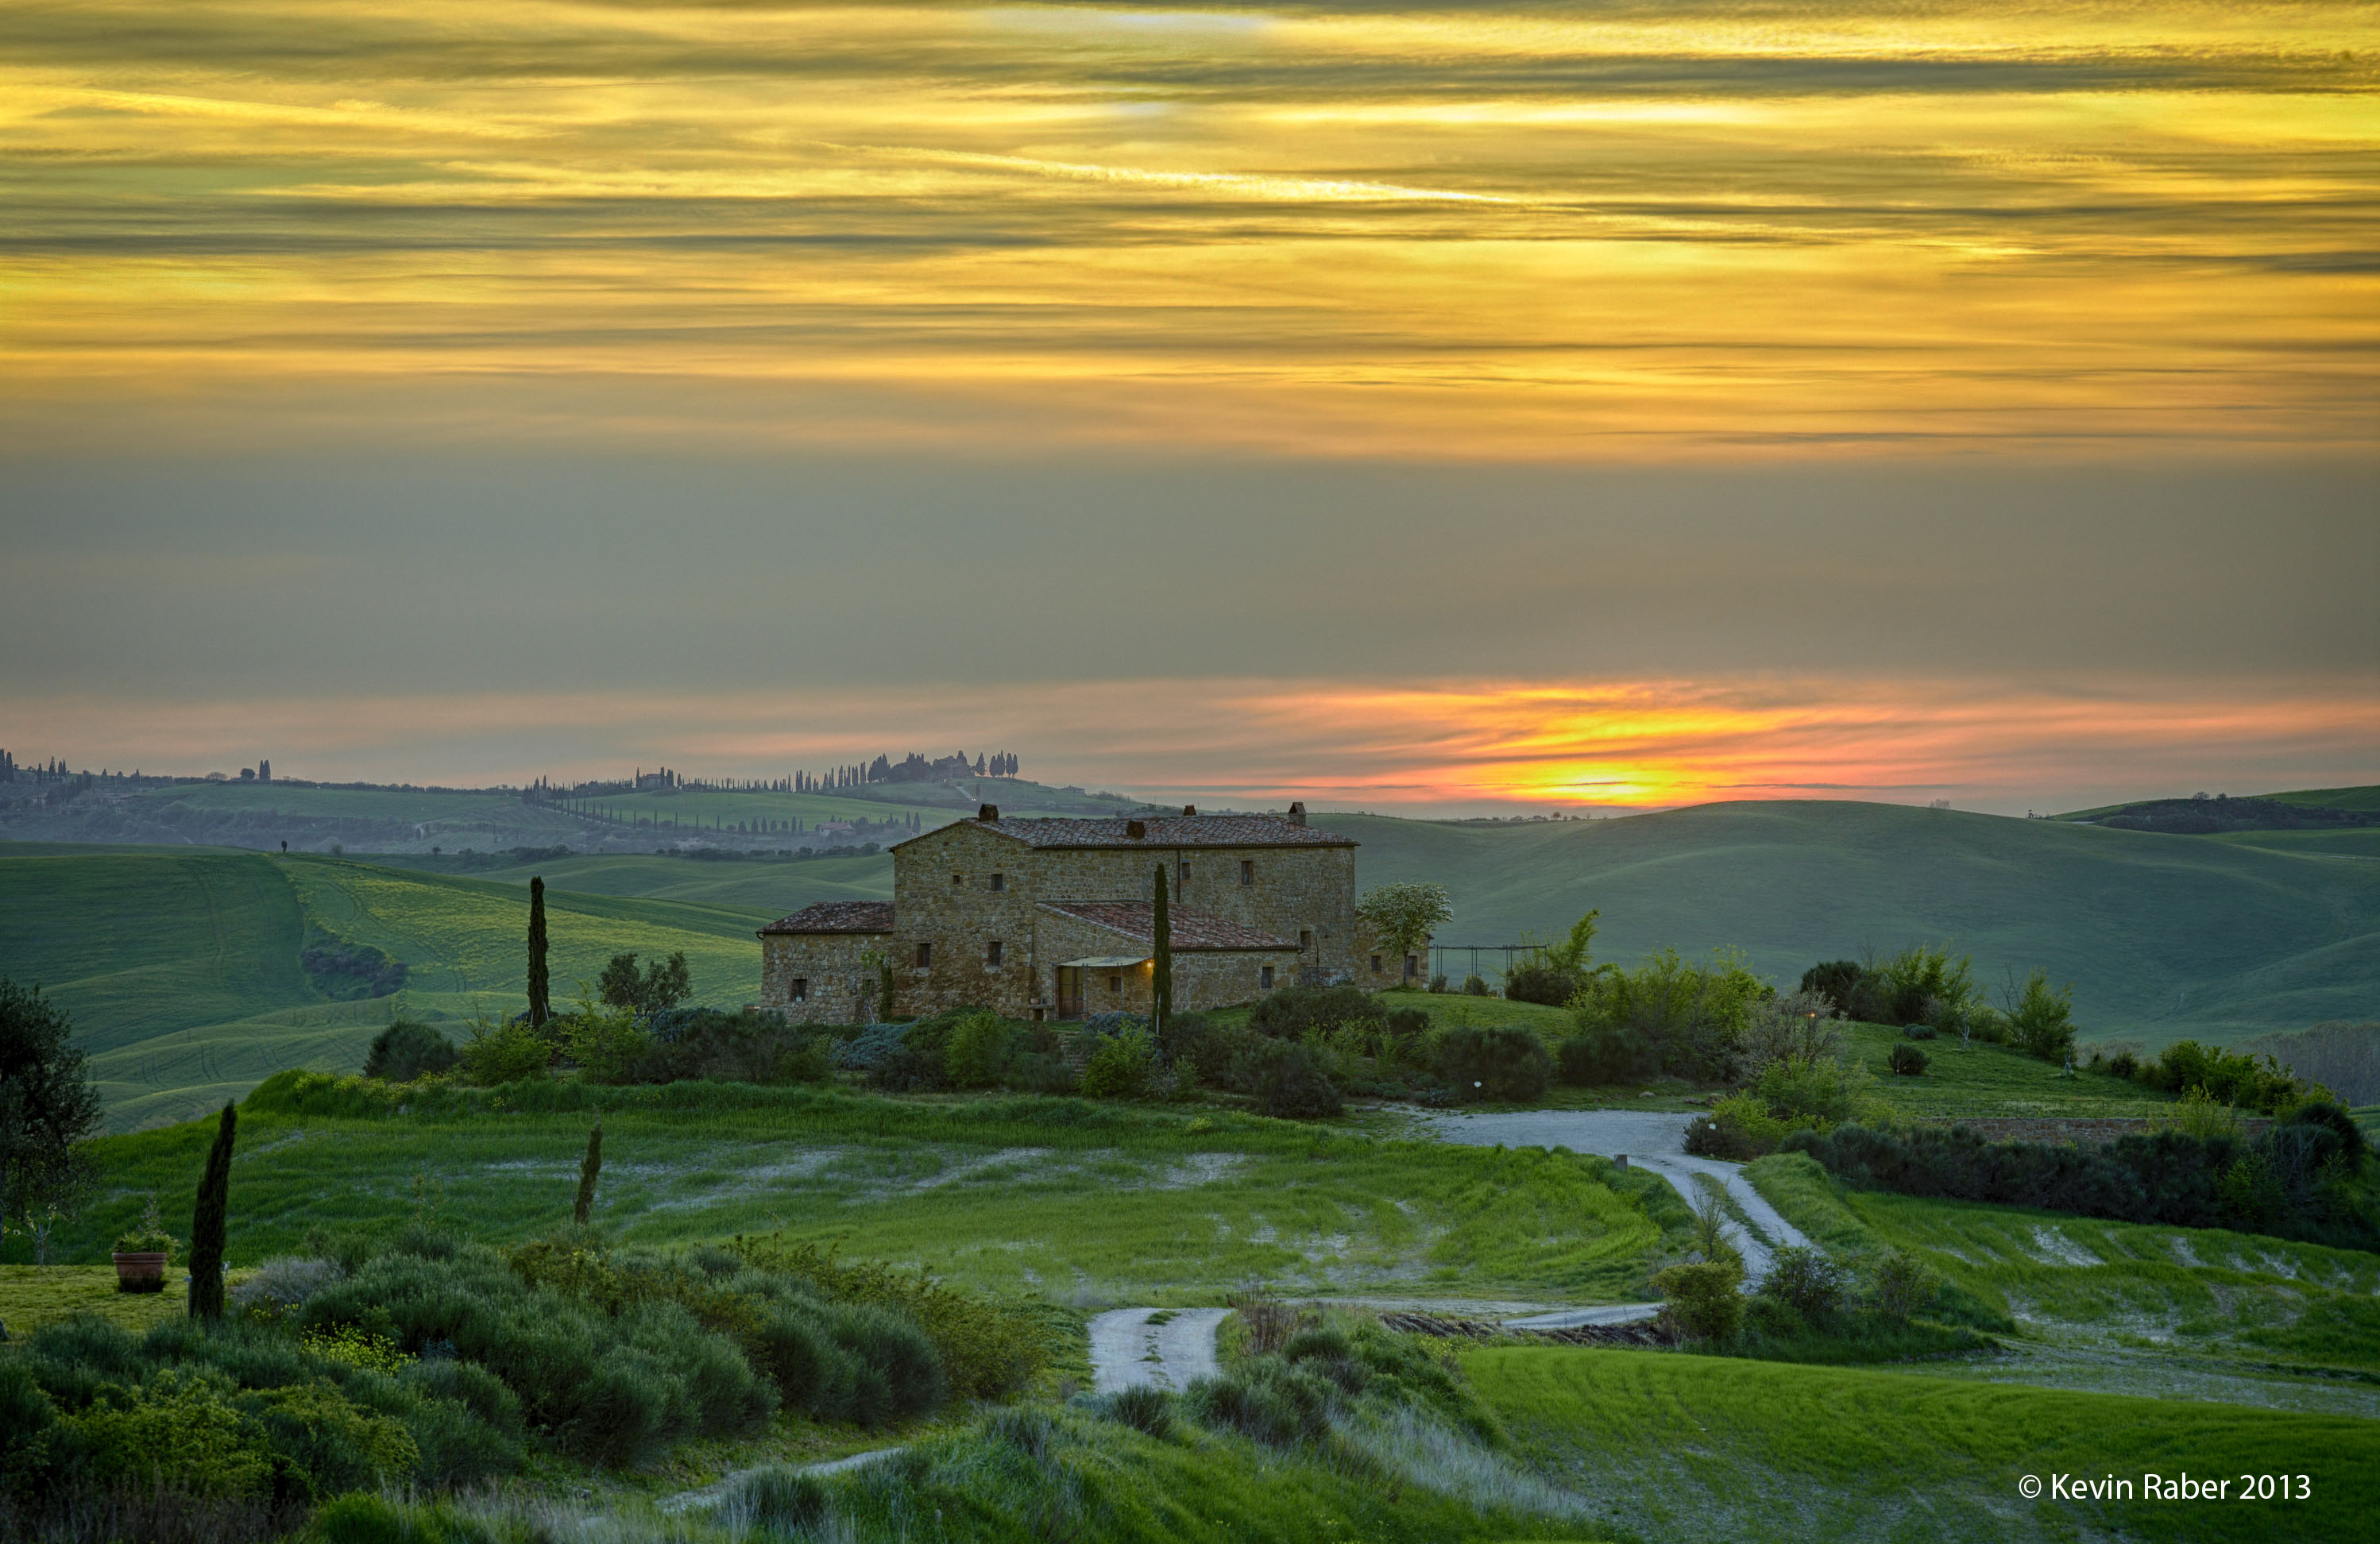 Sunset With Houses. Tuscany, Italy